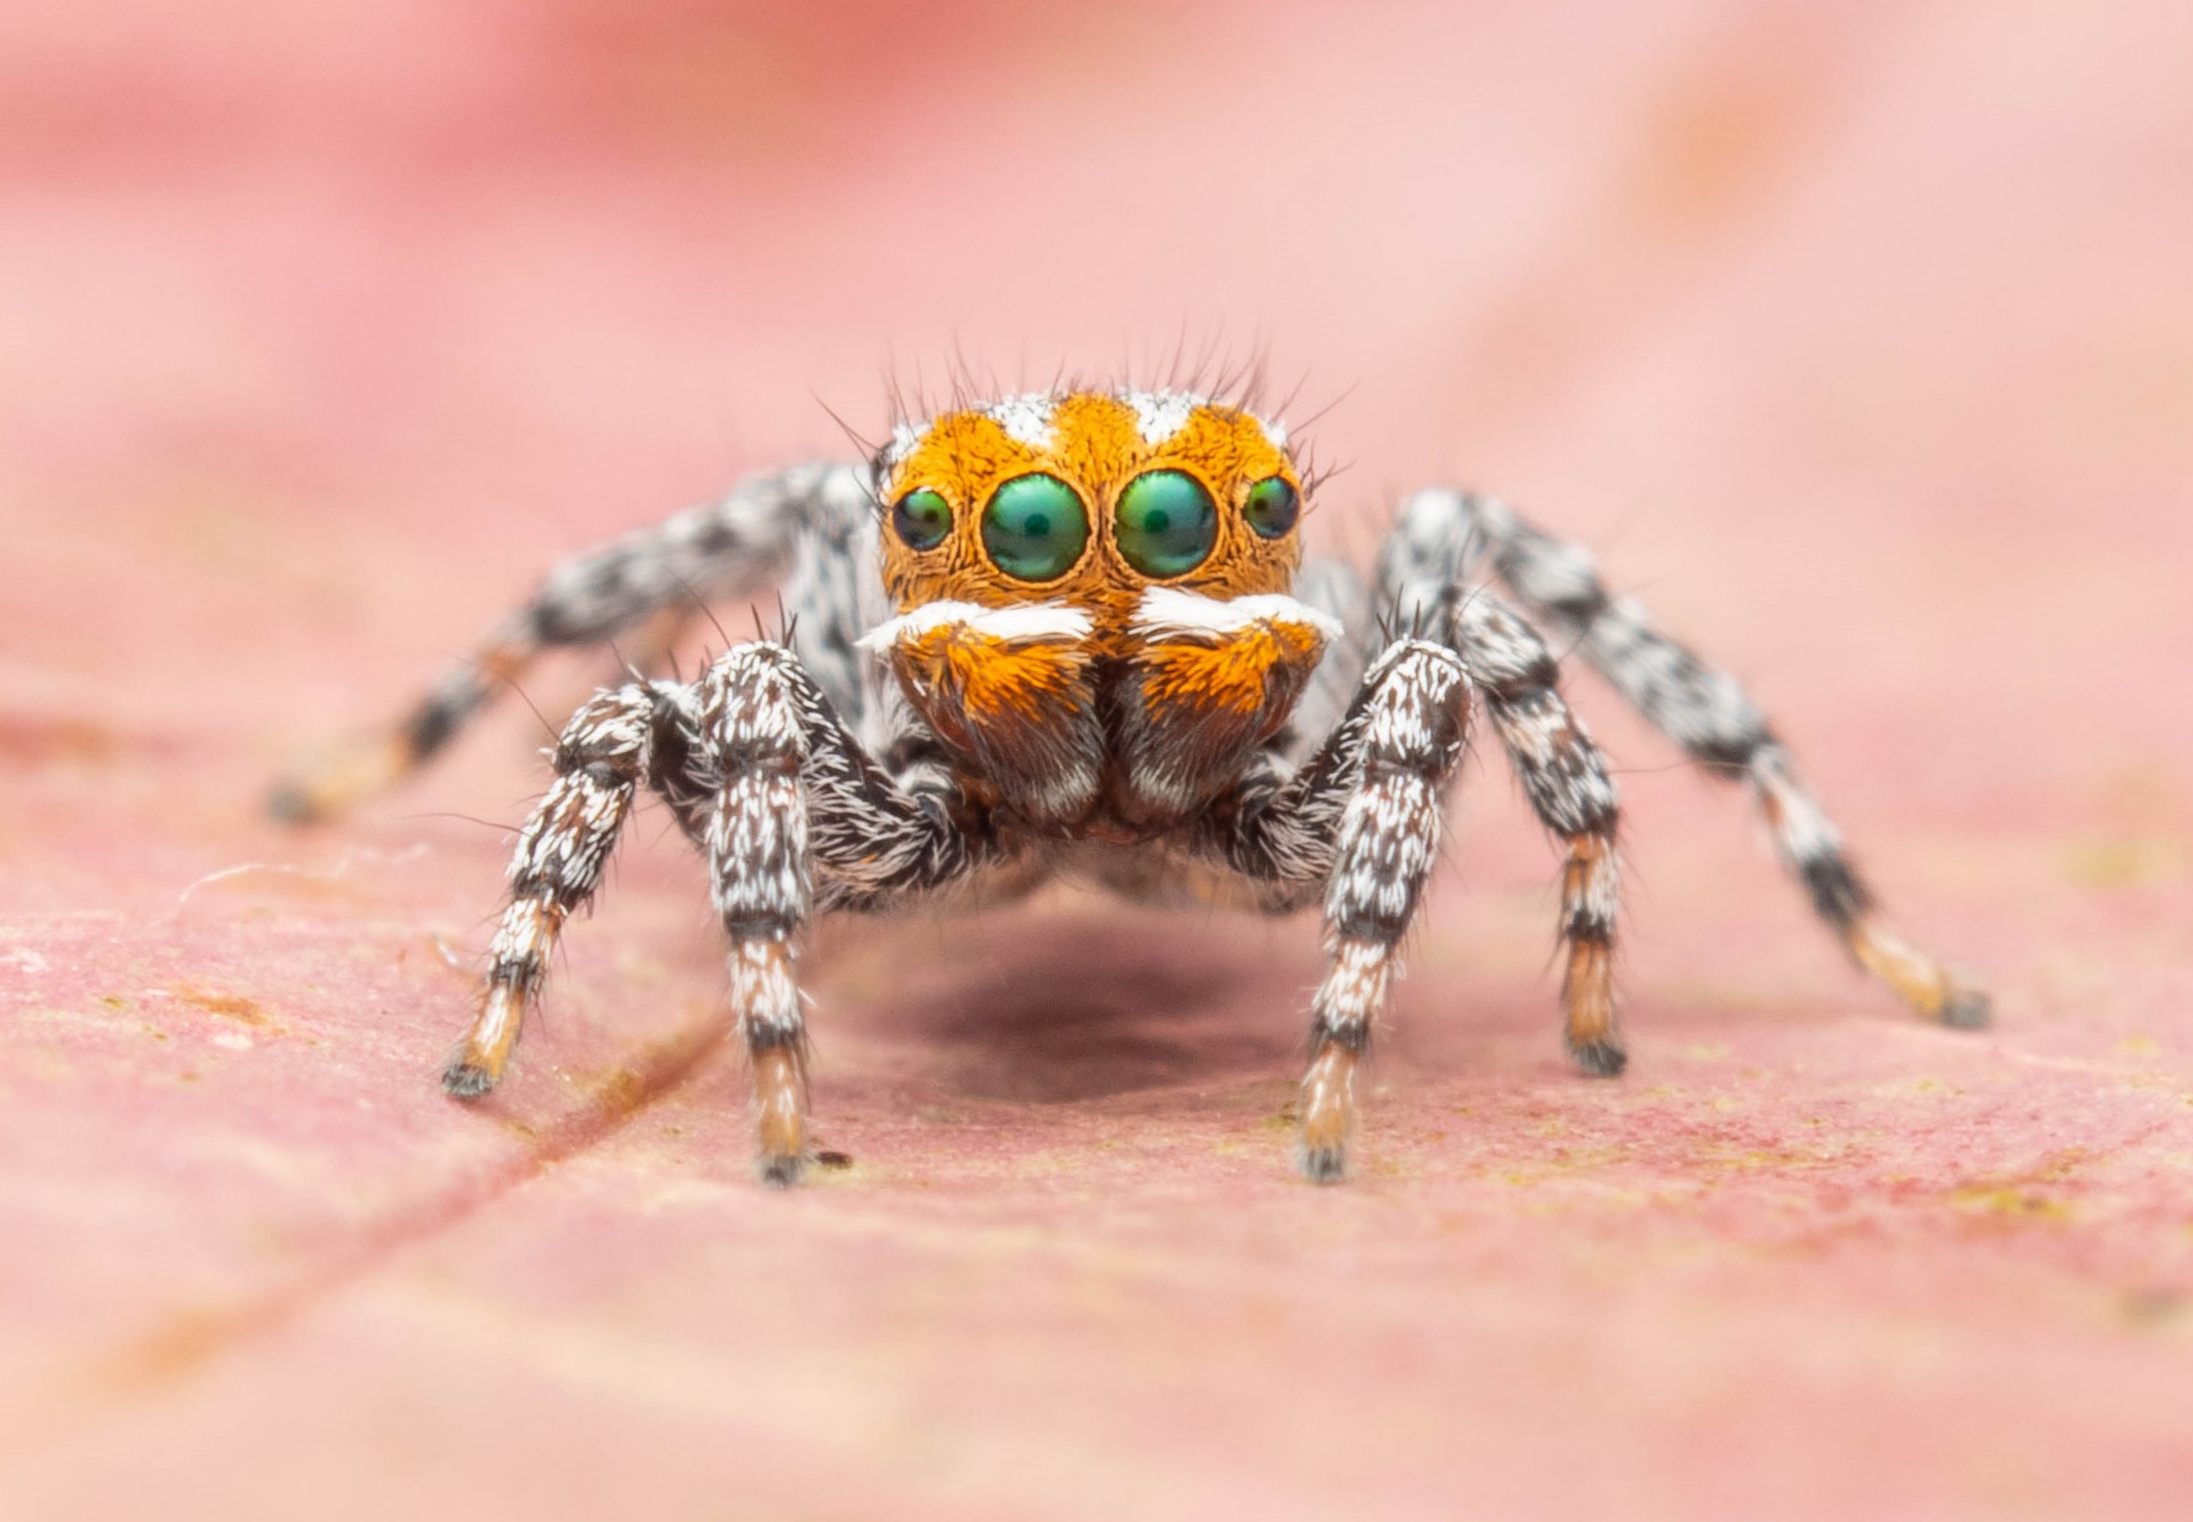 Nemo found: new species of dancing peacock spider named